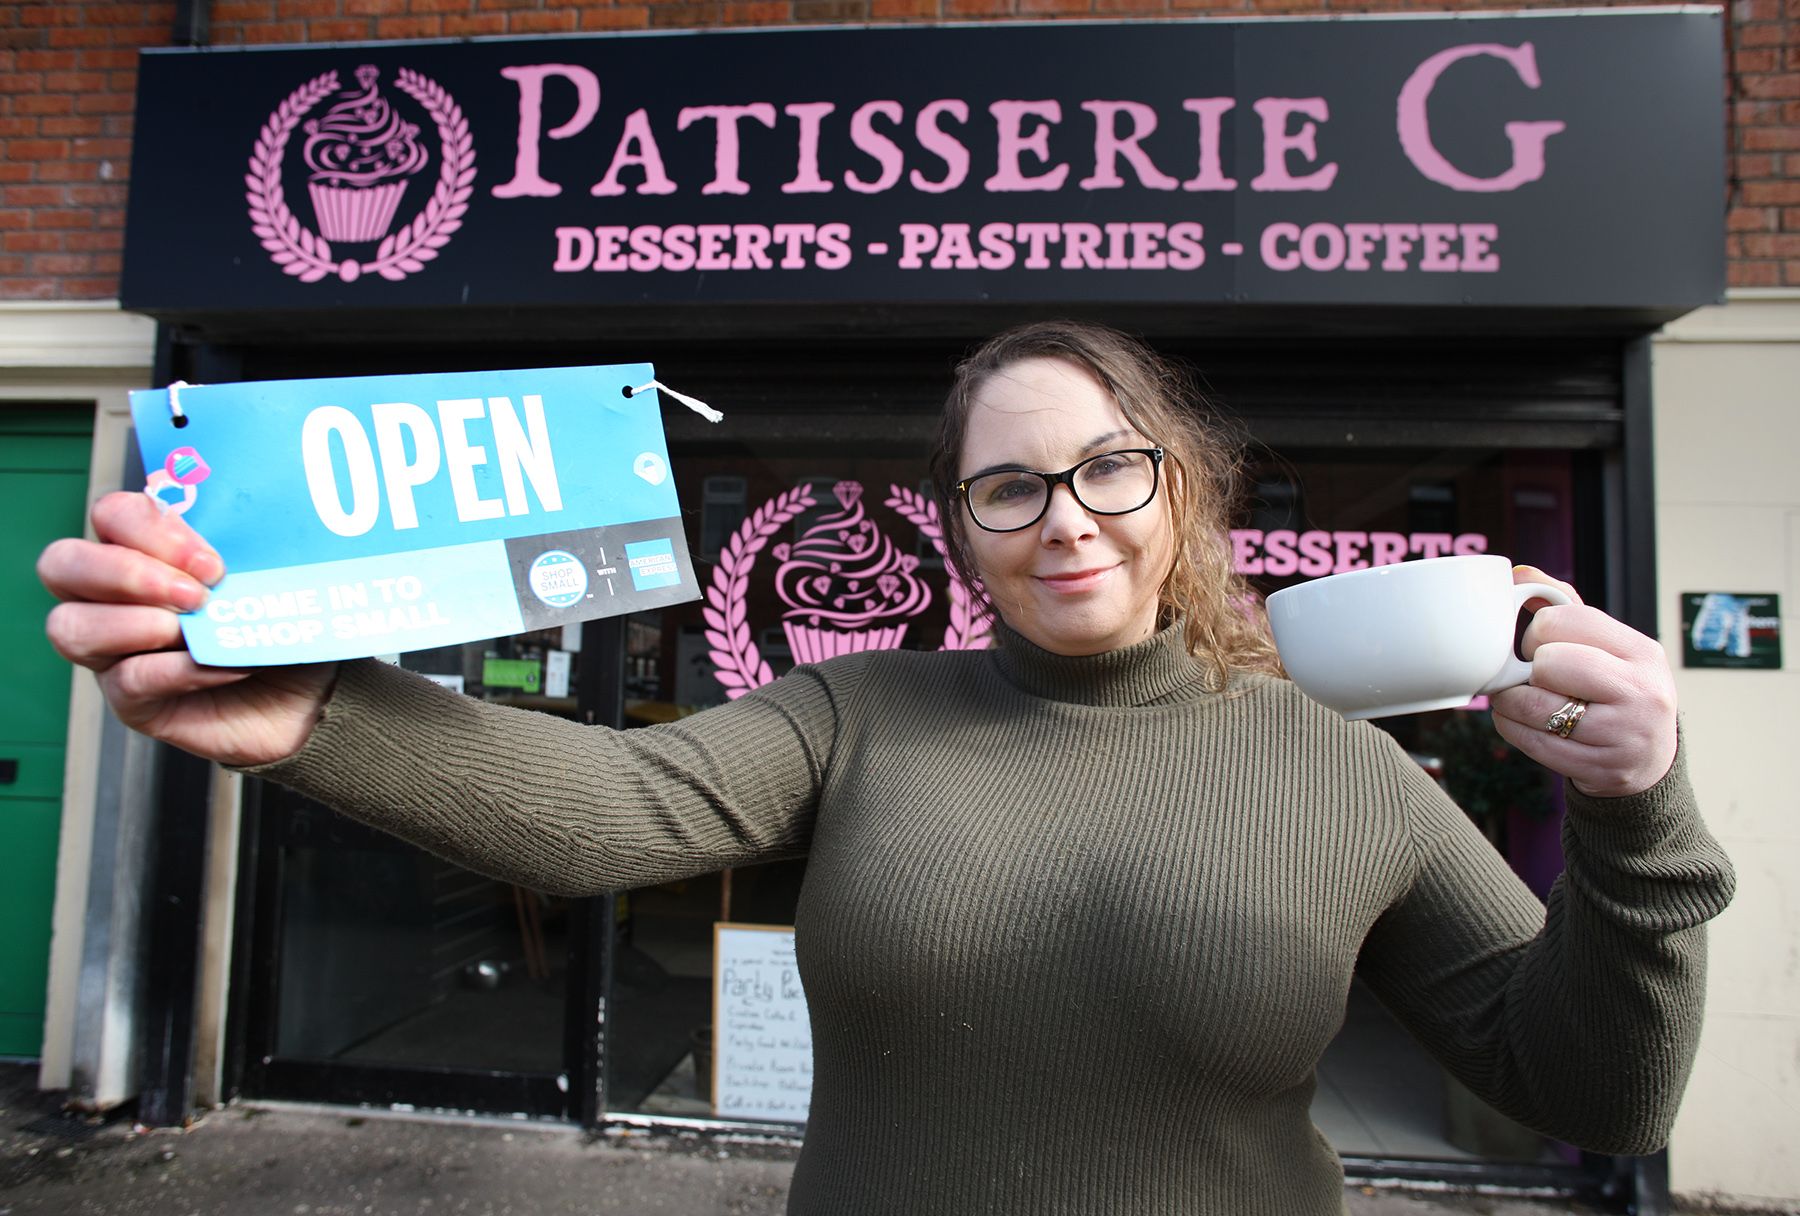 CHEERS: Patisserie G bakery staying open for business